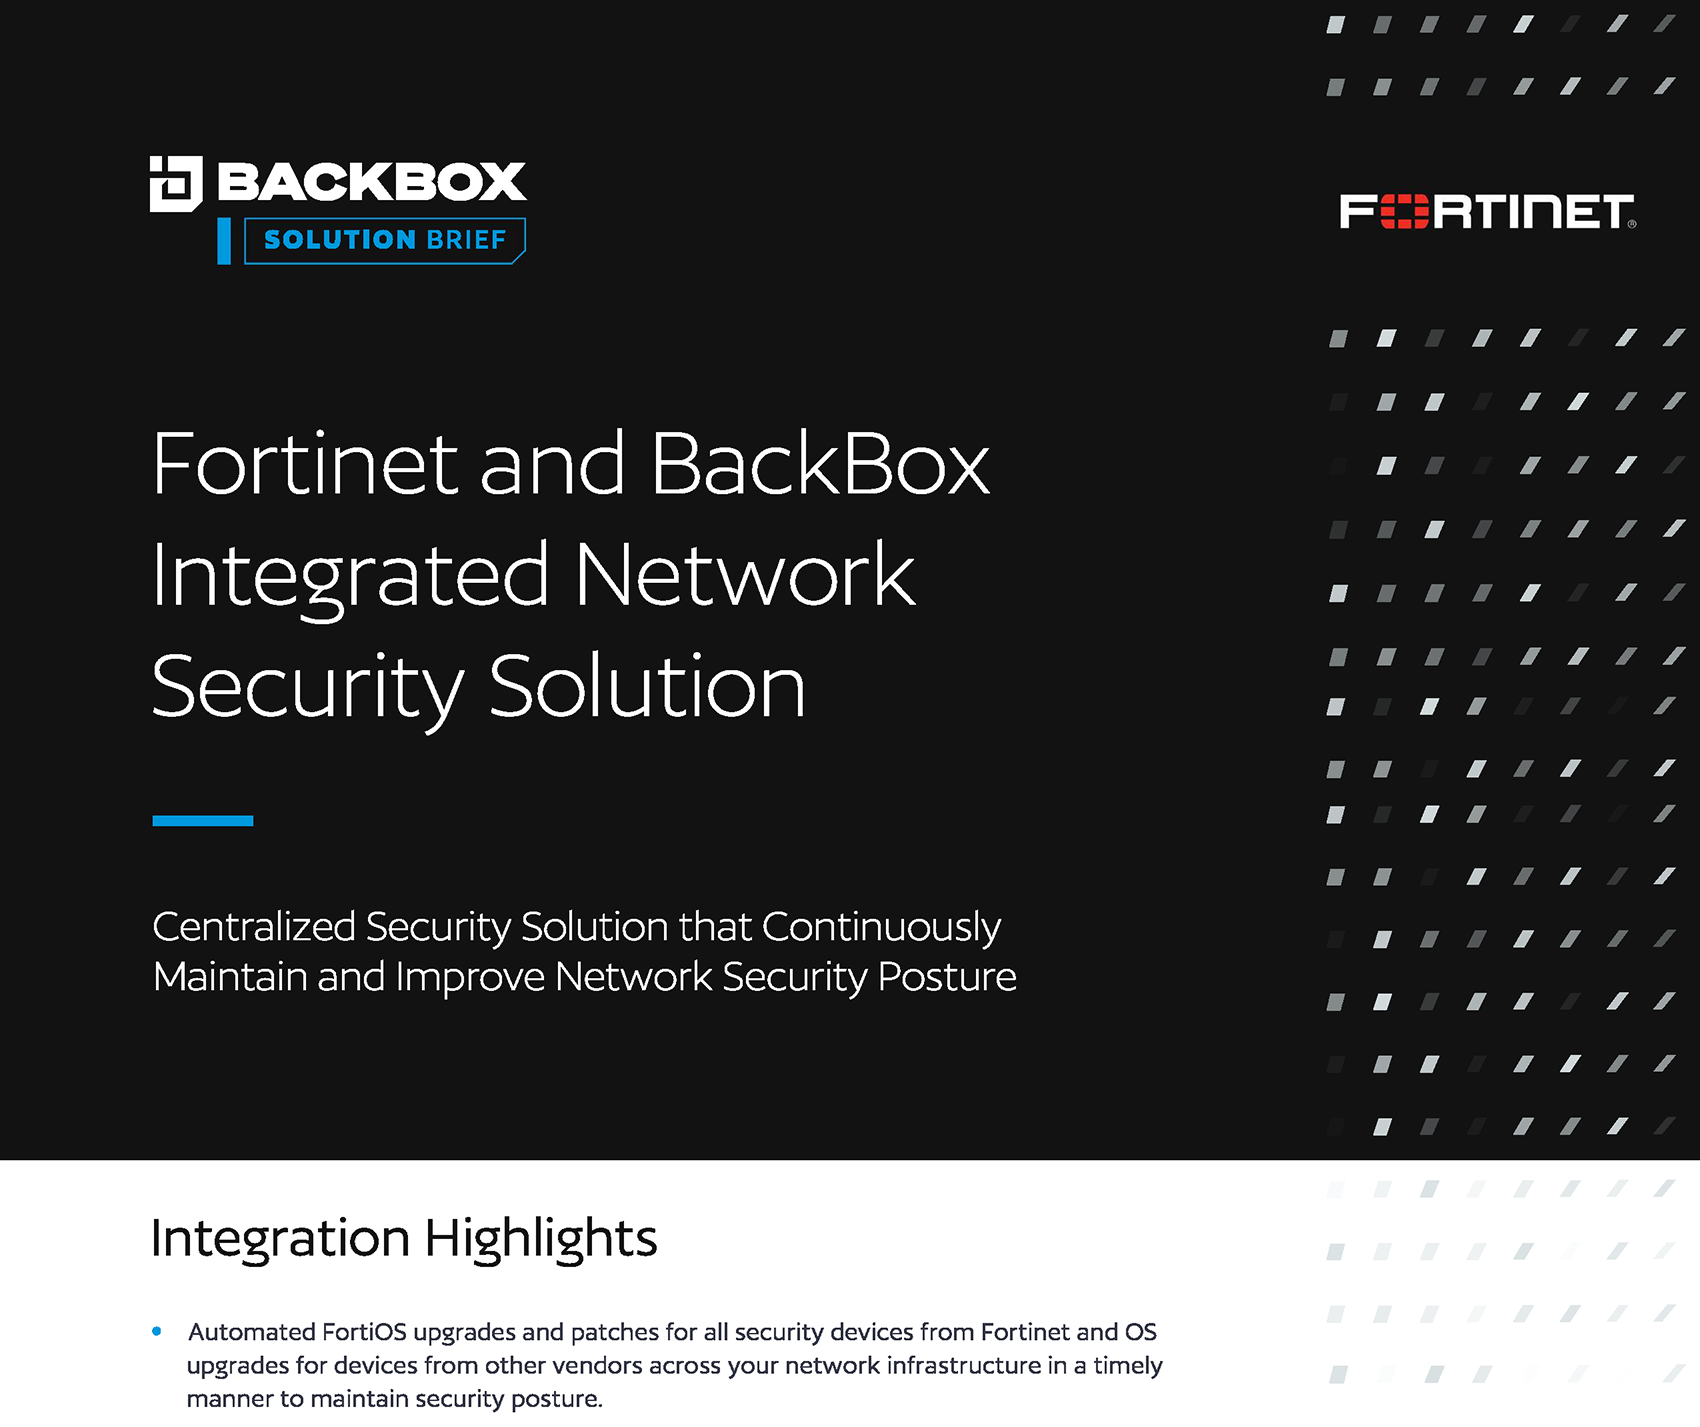 fortinet solution brief